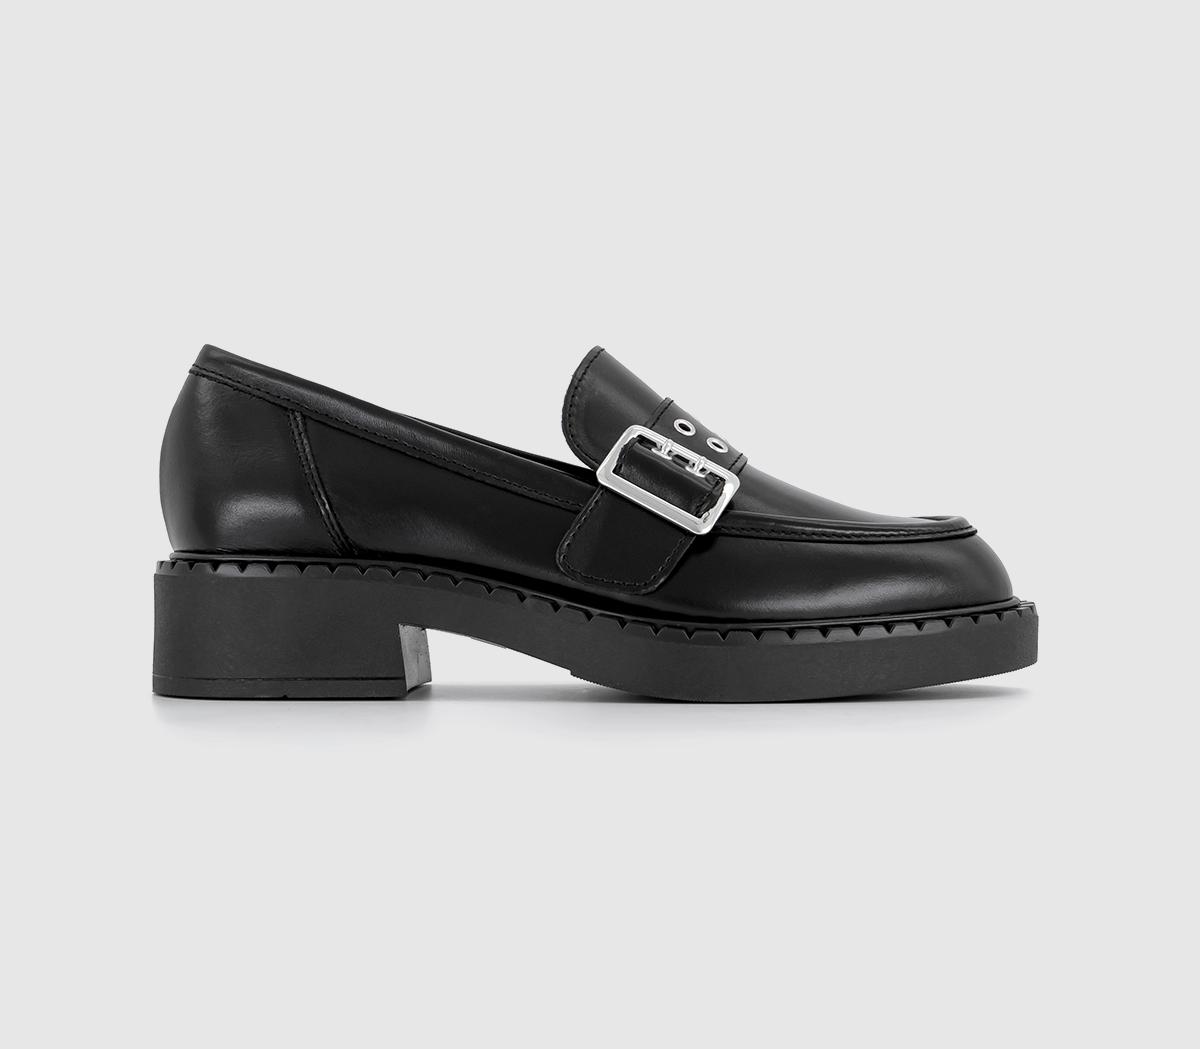 OFFICEFelix Chunky Hardware LoafersBlack Leather